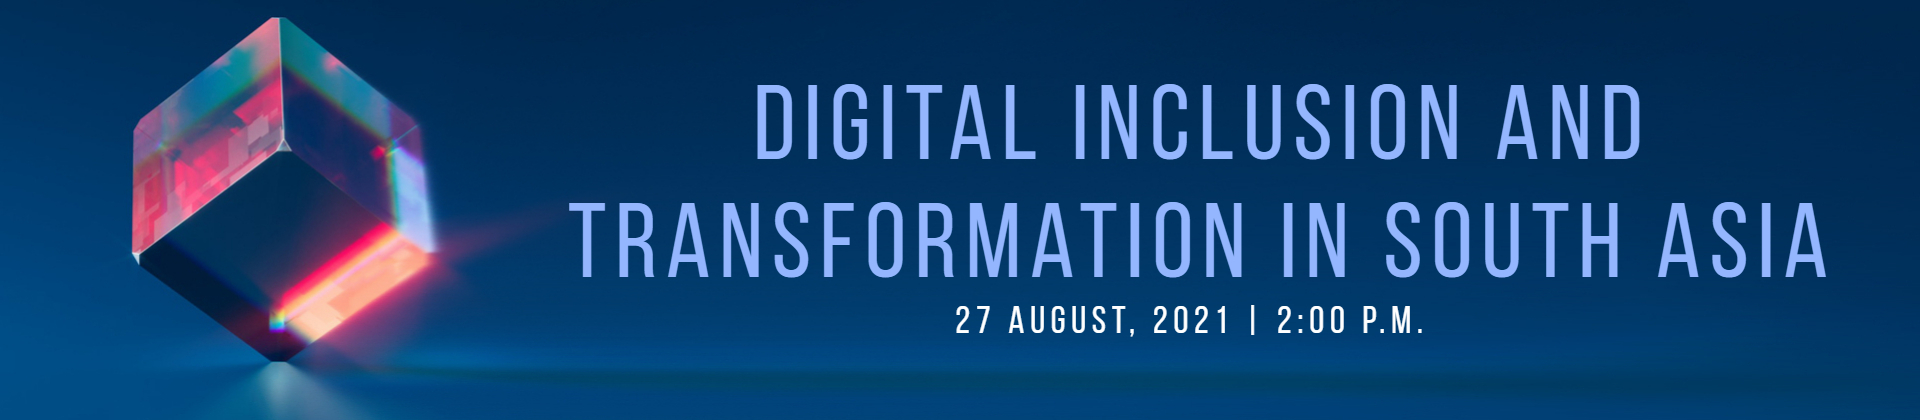 Digital Inclusion and Transformation in South Asia